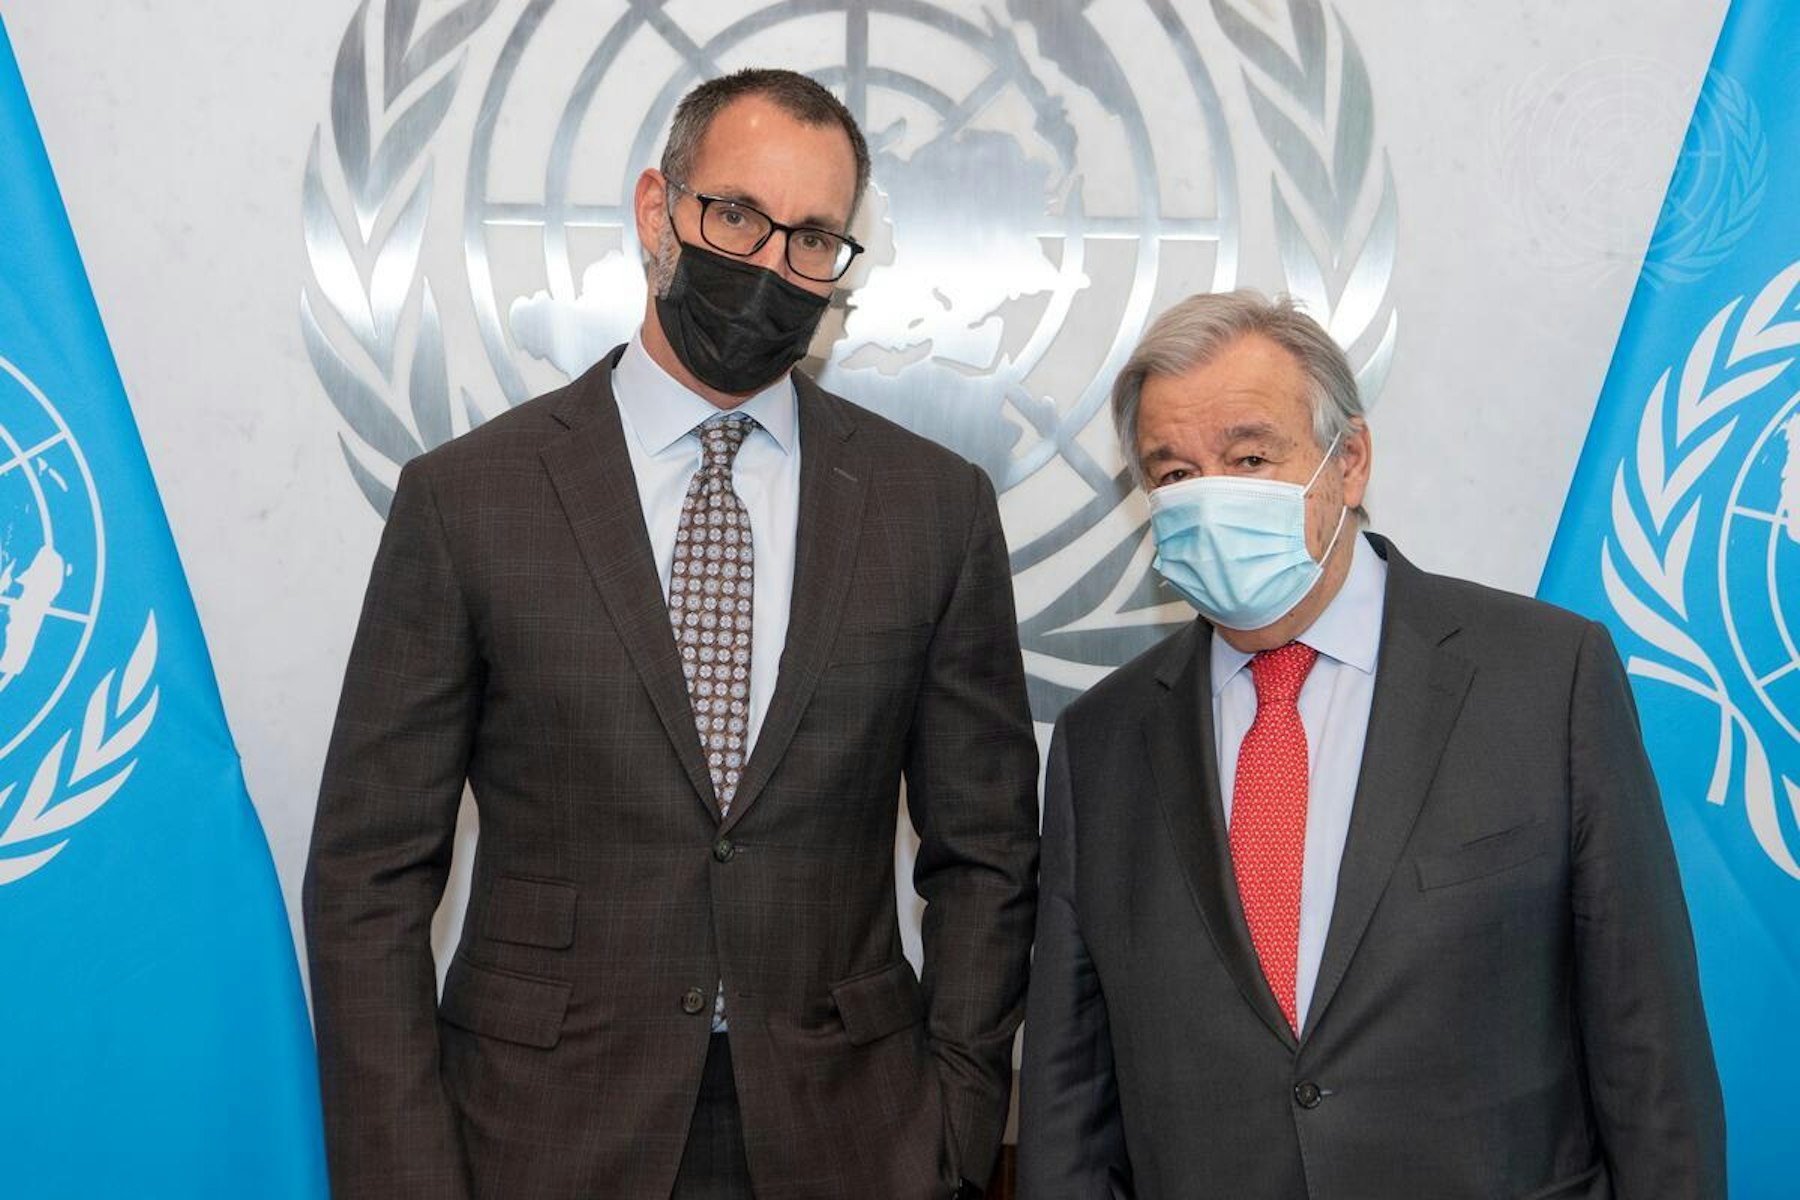 Prince Rahim Aga Khan and United Nations Secretary General Mr António Guterres in New York on 9 February 2022. | Photo Courtesy:Eskinder Debebe